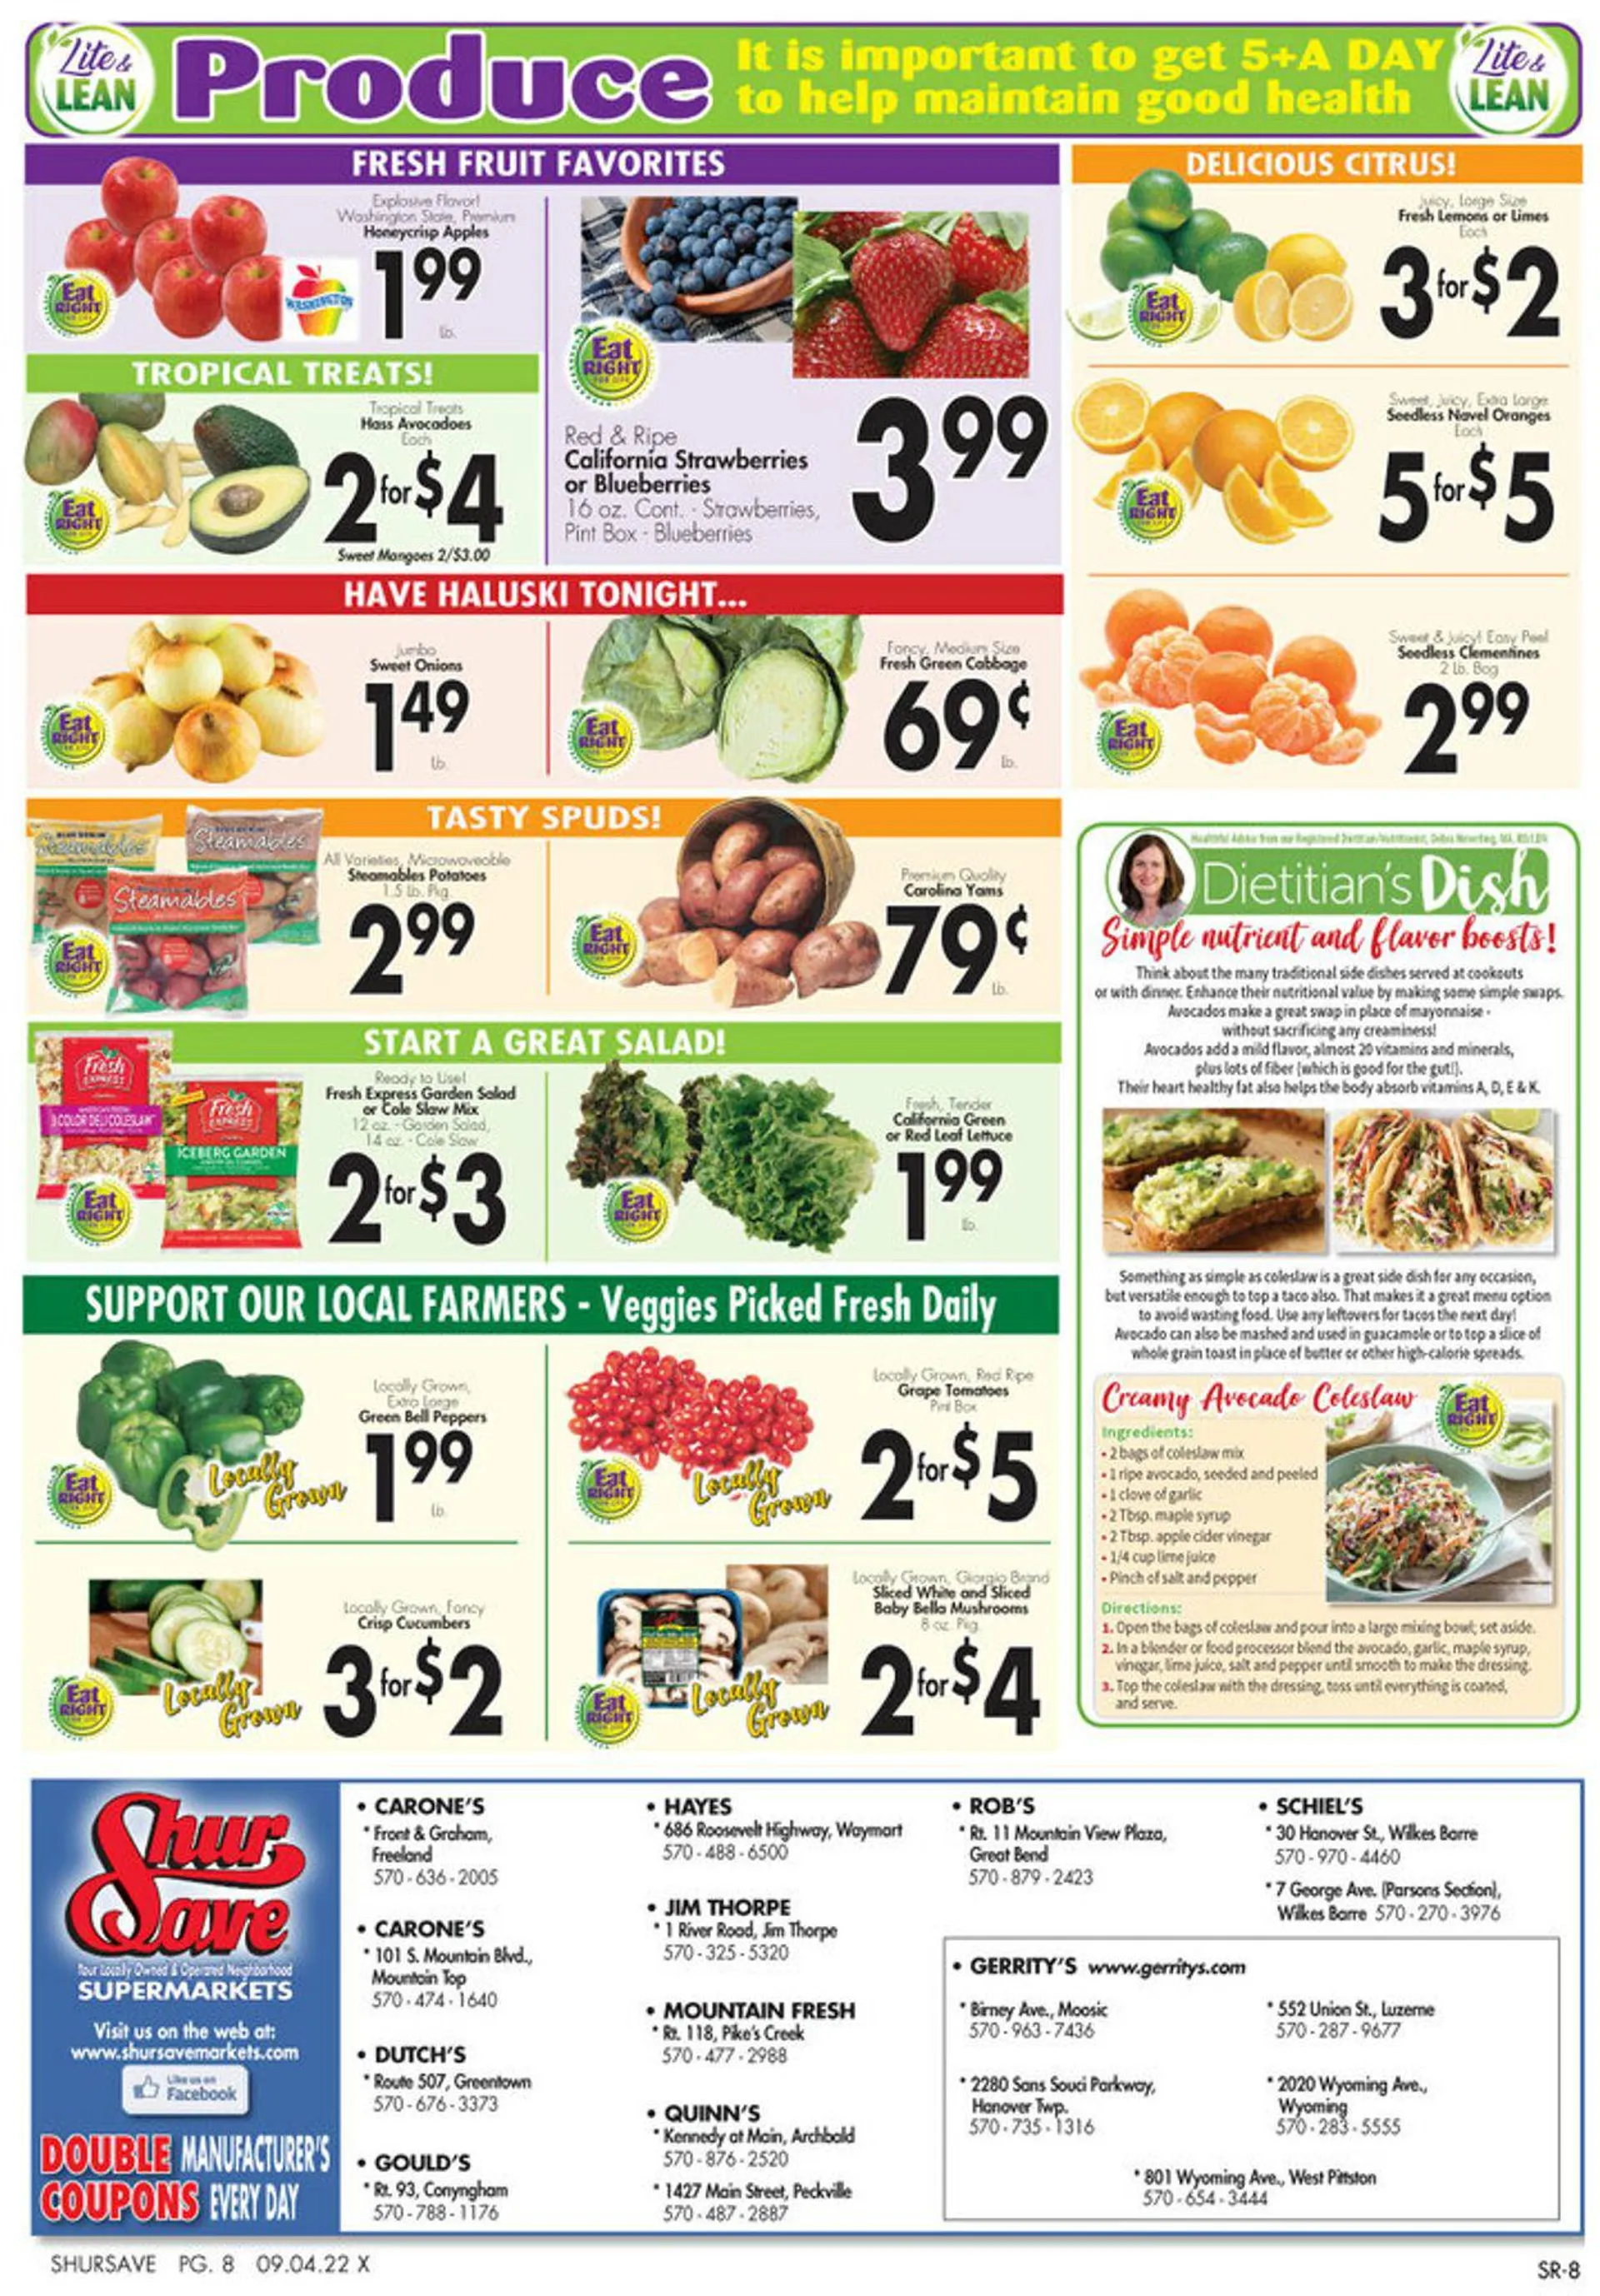 Gerritys Supermarkets Current weekly ad - 9